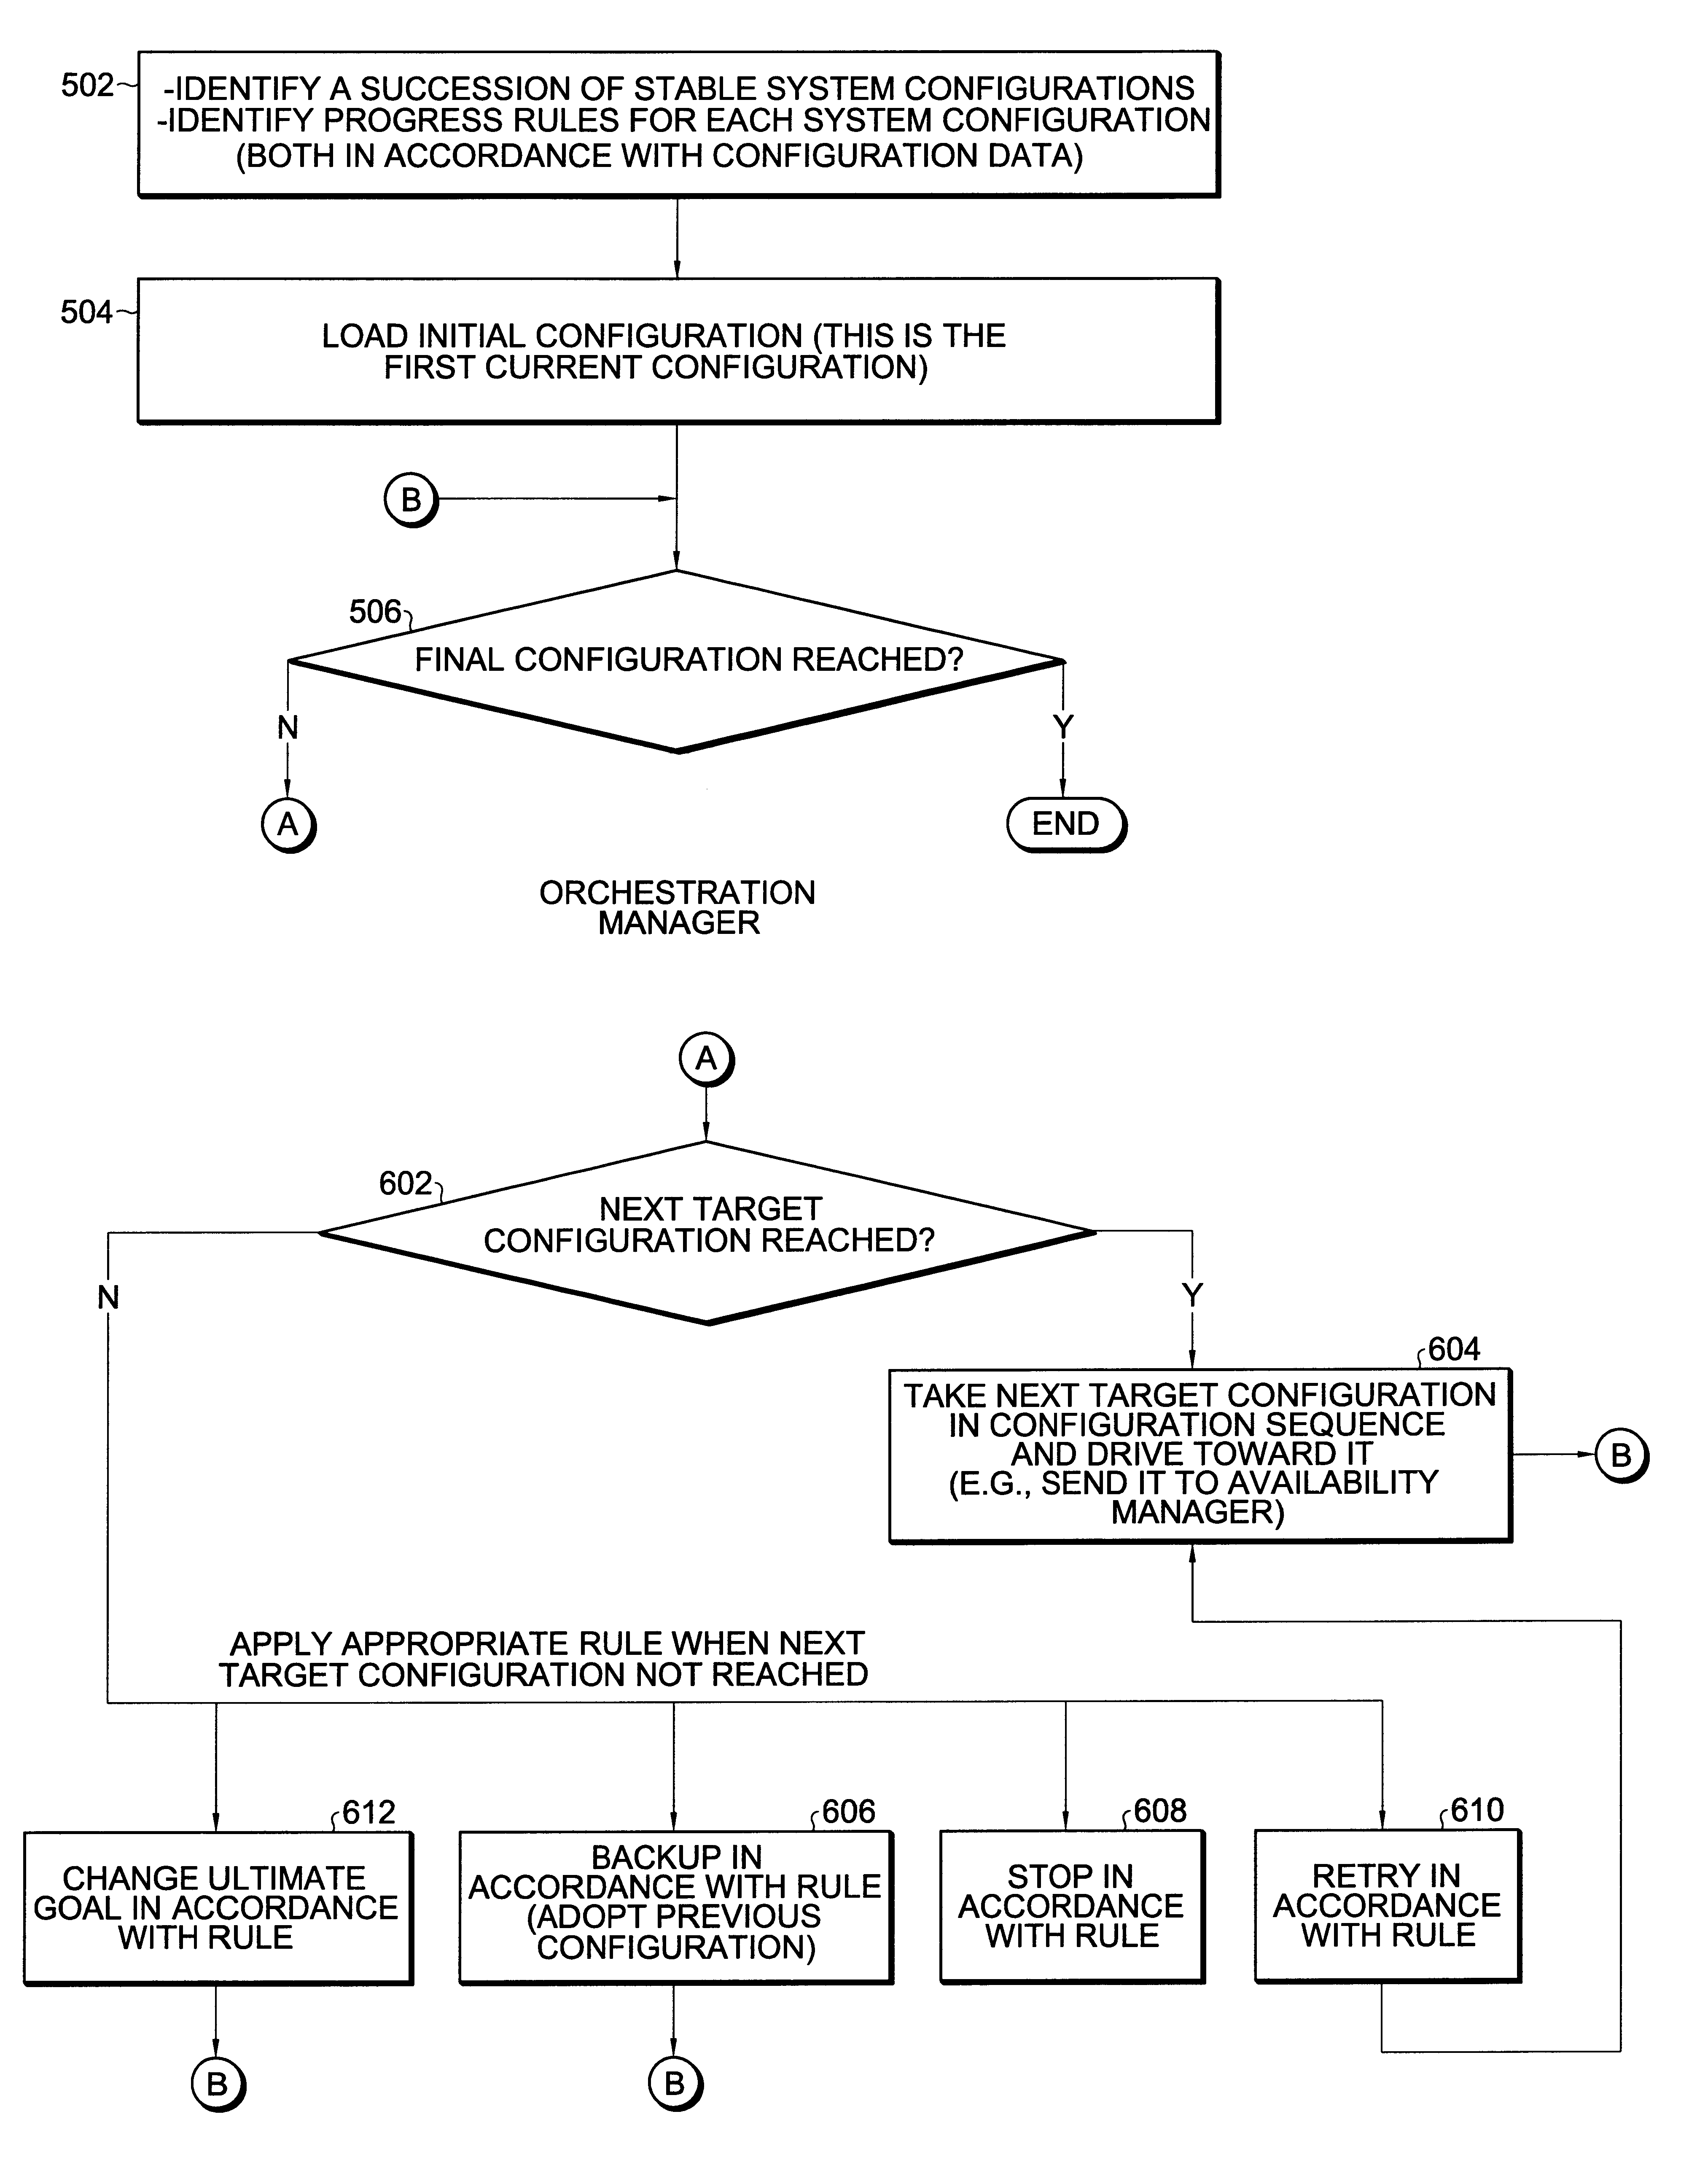 System and method for simplifying and managing complex transactions in a distributed high-availability computer system